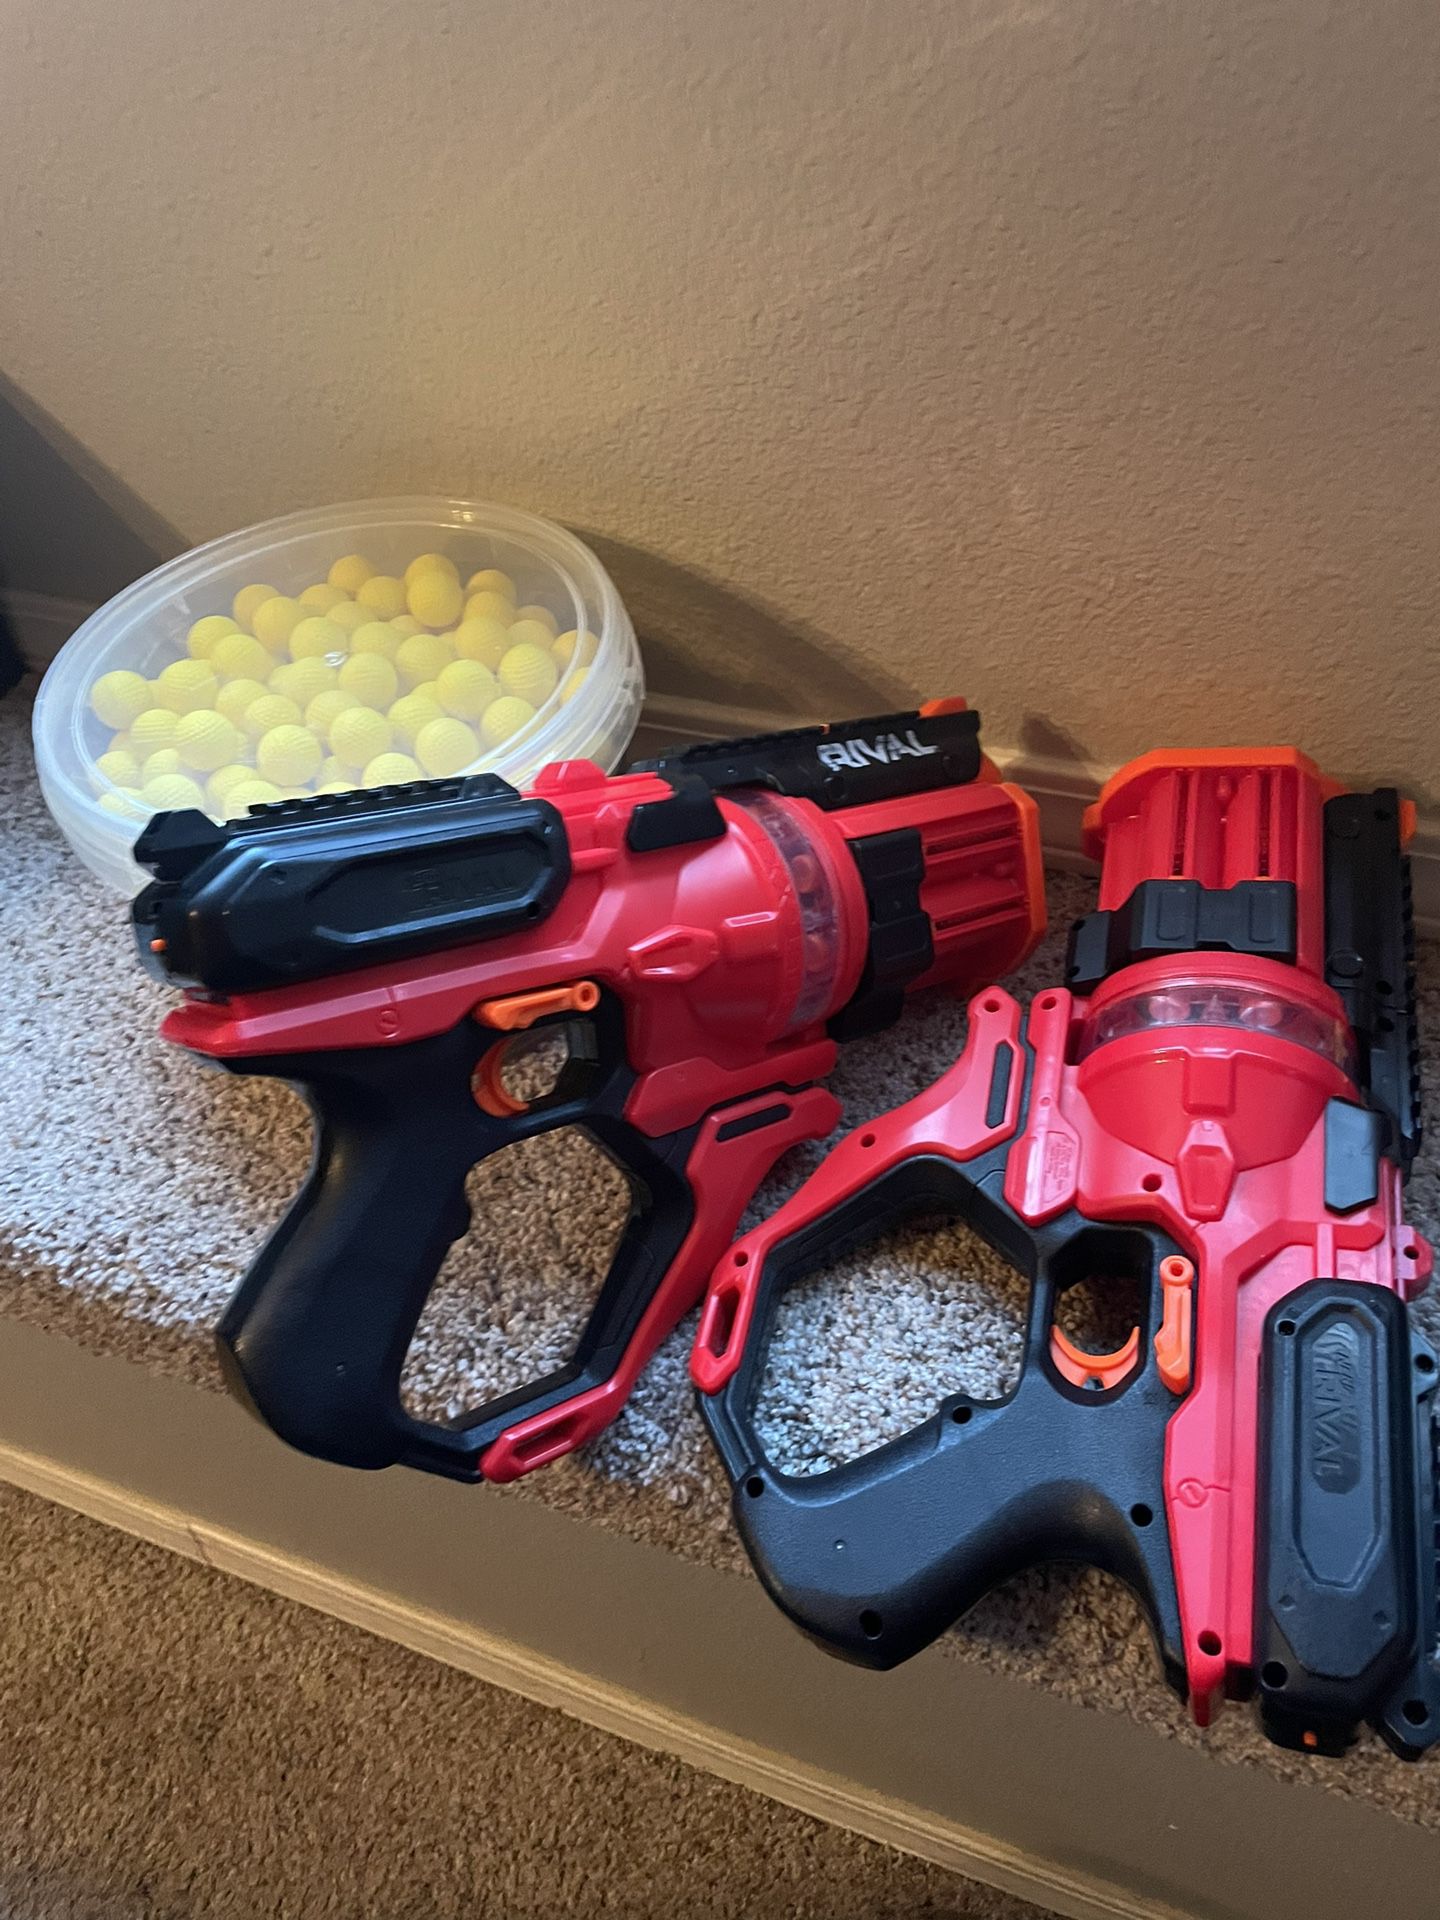 Nerf Rival and 400 Balls (Approximately)